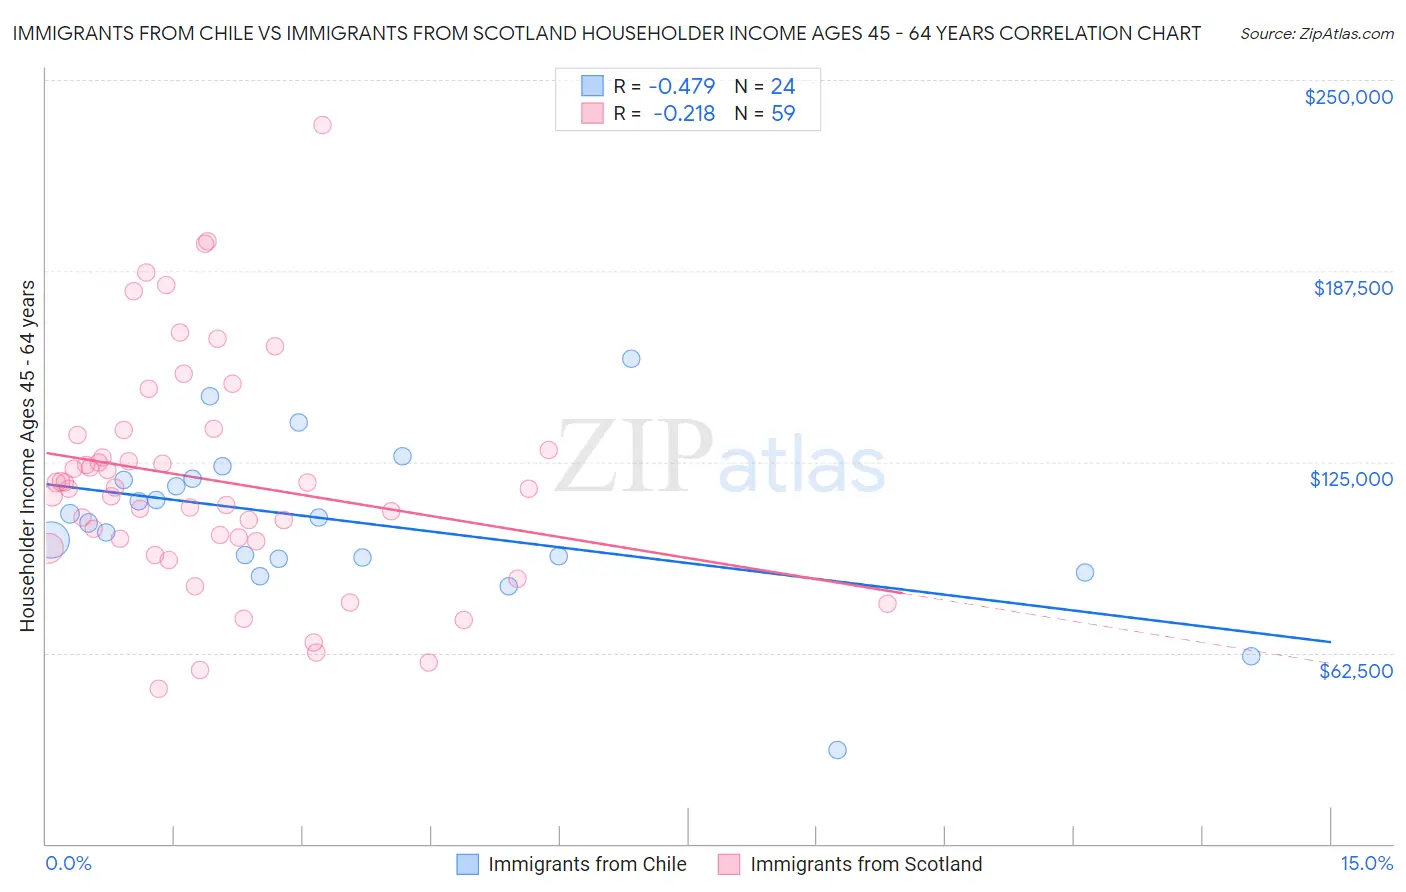 Immigrants from Chile vs Immigrants from Scotland Householder Income Ages 45 - 64 years